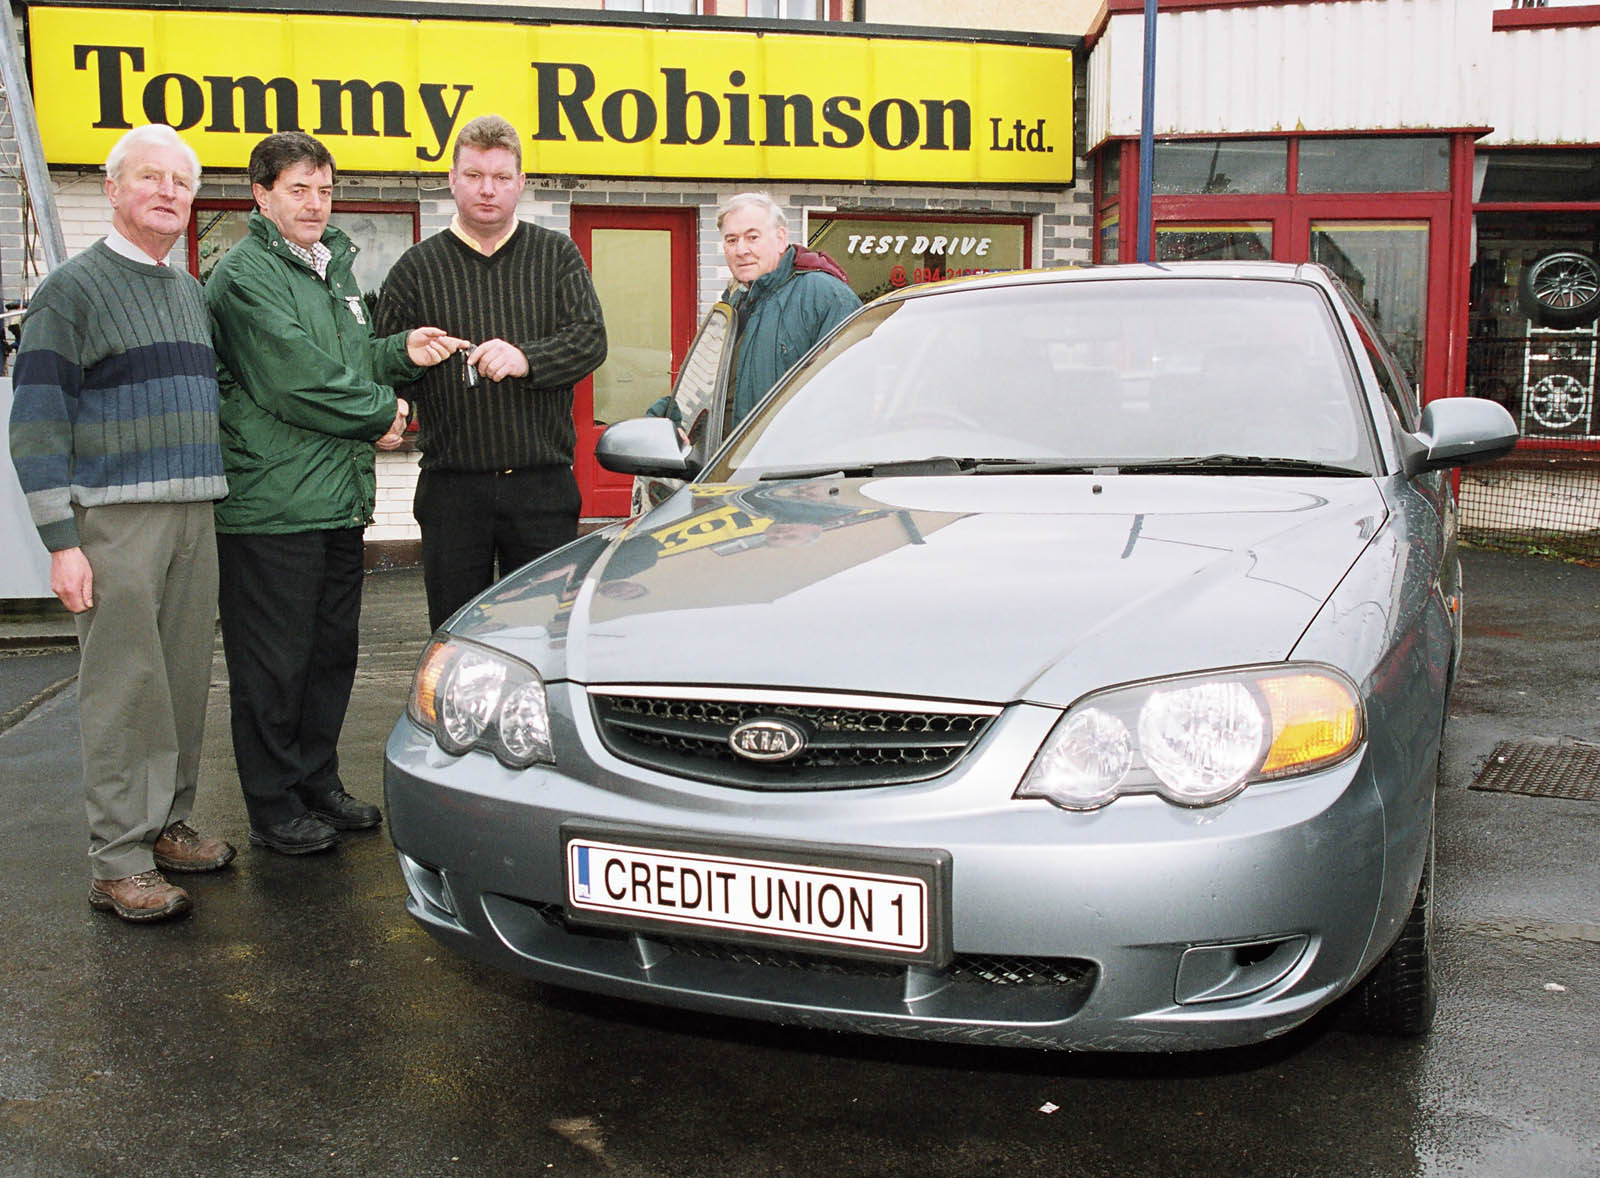 Castlebar Credit Union Decembers Members draw winner of the first prize Michael McHale from Parke being presented with the keys of a Kia Rio car supplied from Tommy Robinsons Garage Spencer St Castlebar by John Burke. L-R: Tommy Robinson (proprietor), John Burke (CU), Michael McHale (Winner), Jack Loftus (CU). Photo  Ken Wright Photography 2005. 